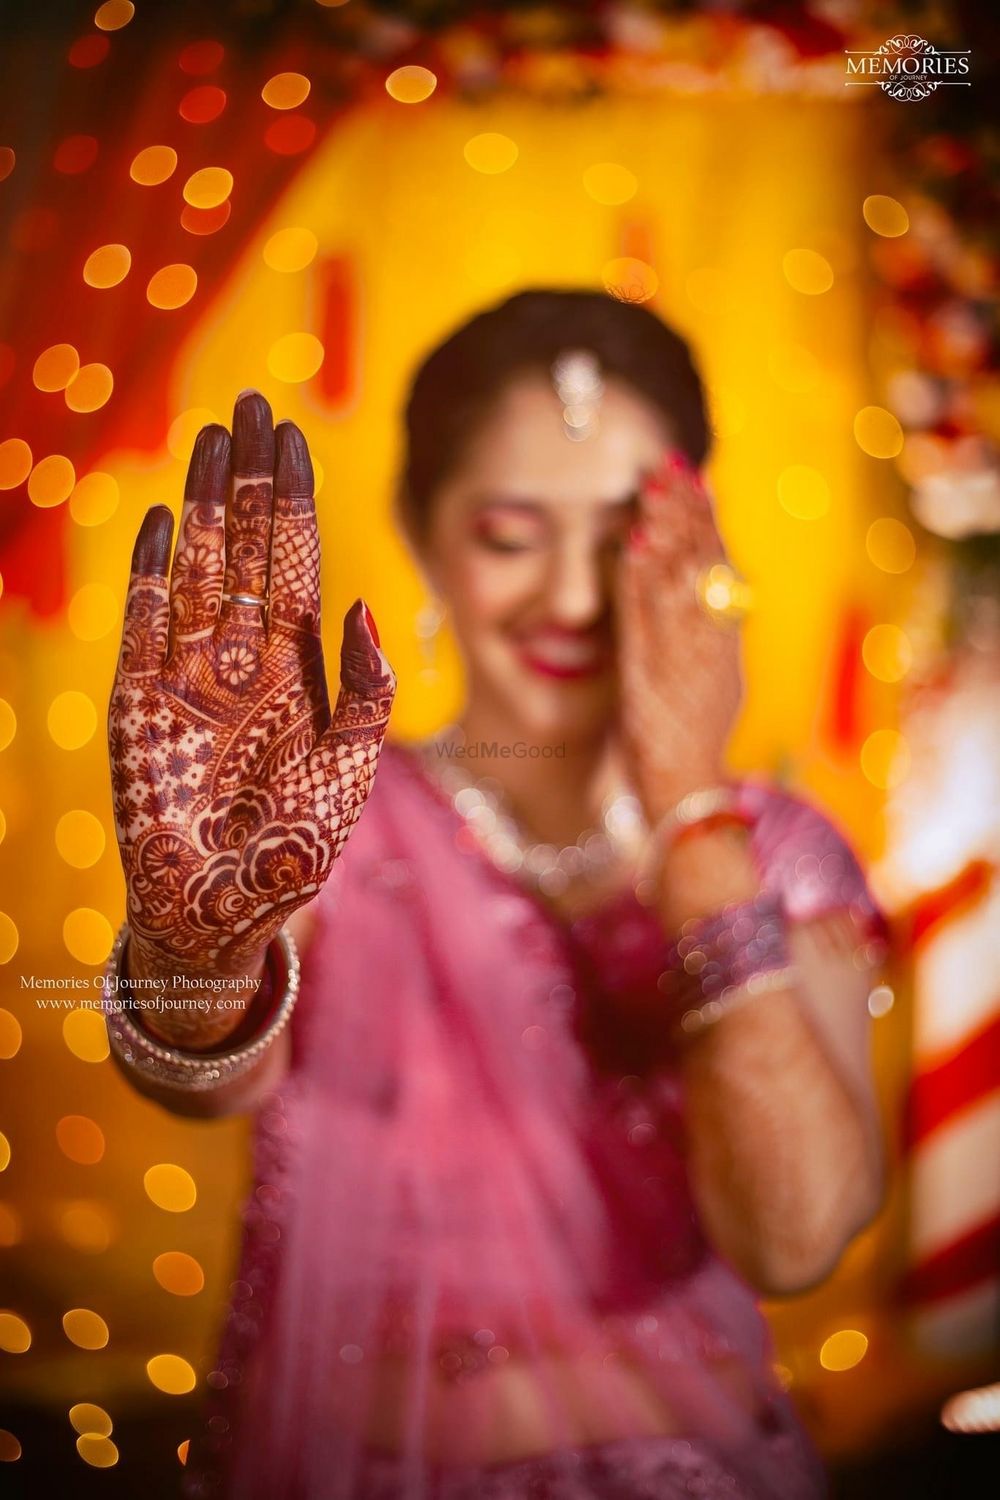 Photo From Bridal Mehendi - By Memories of Journey